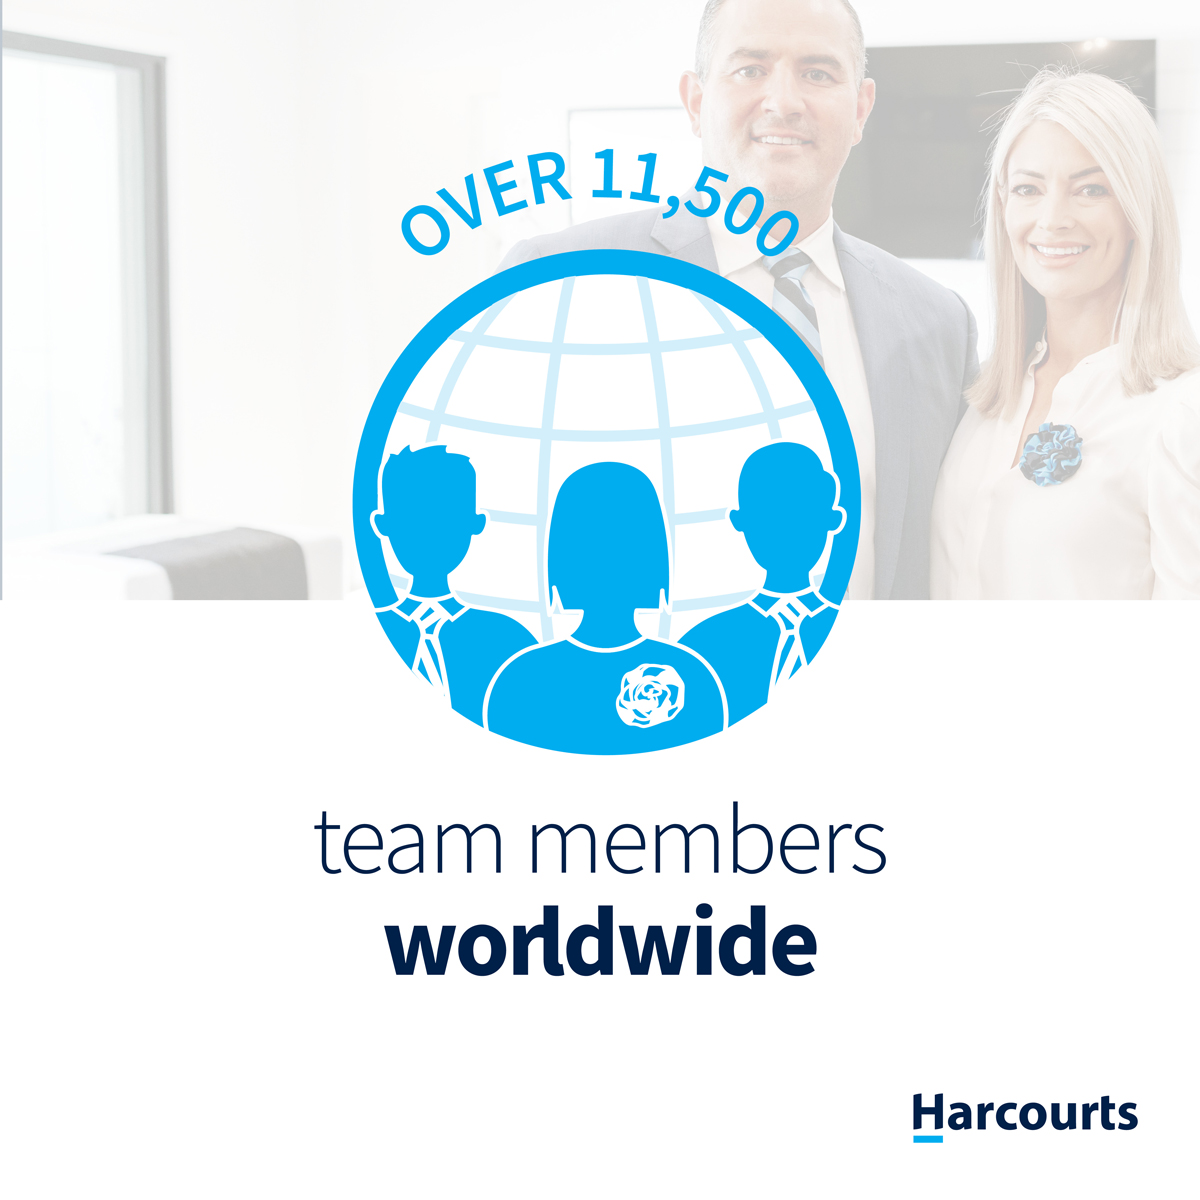 Harcourts has over 11,500 team members worldwide.